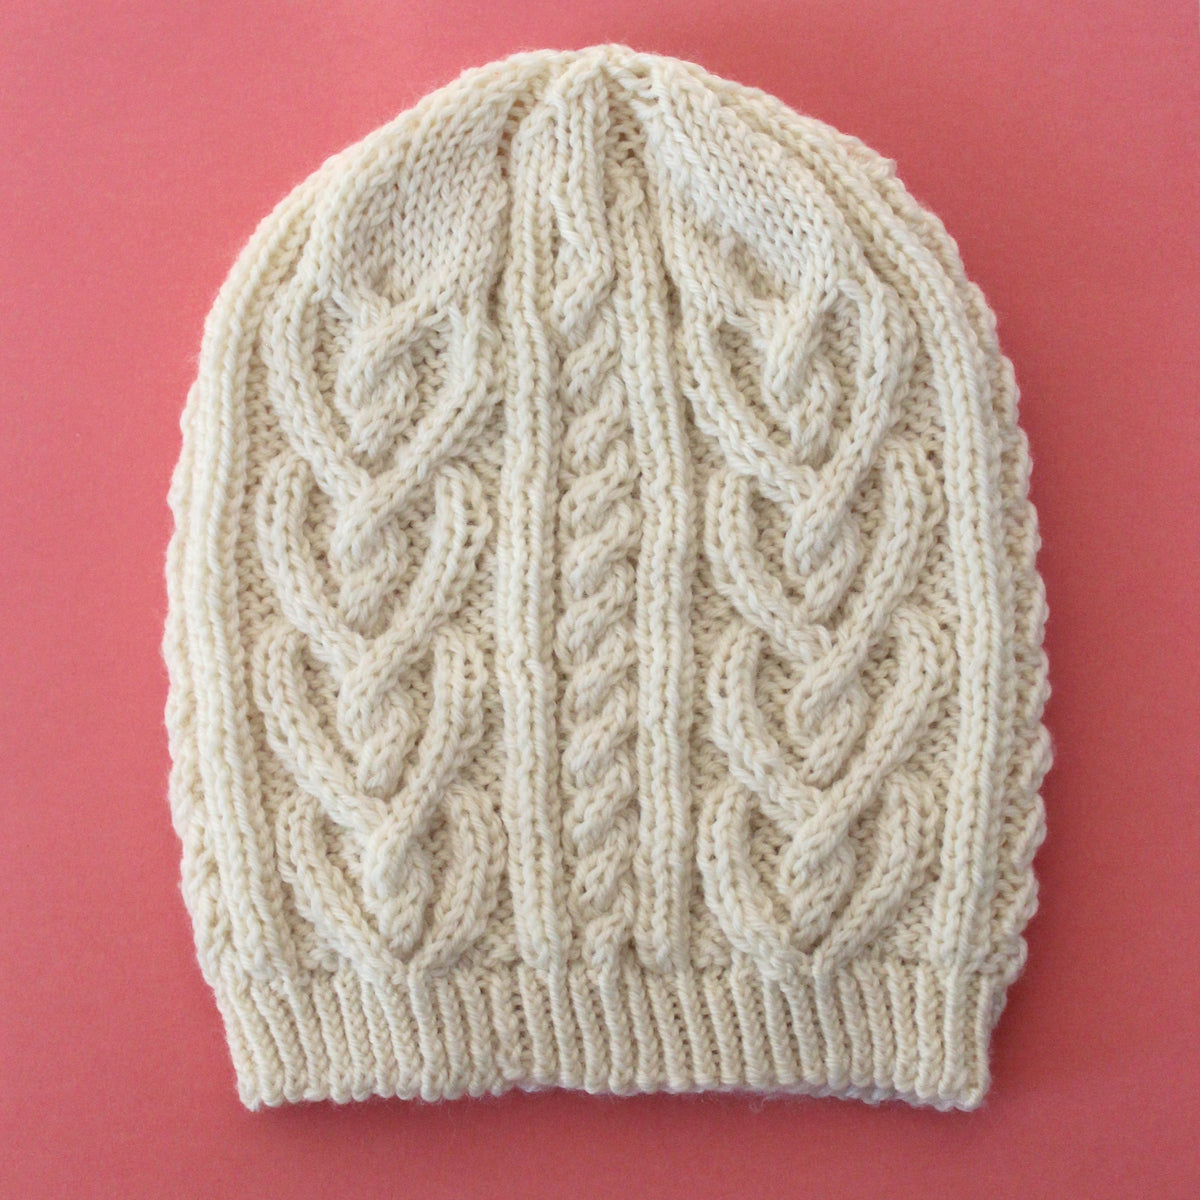 Twisted Love Heart Cable Hat Kit